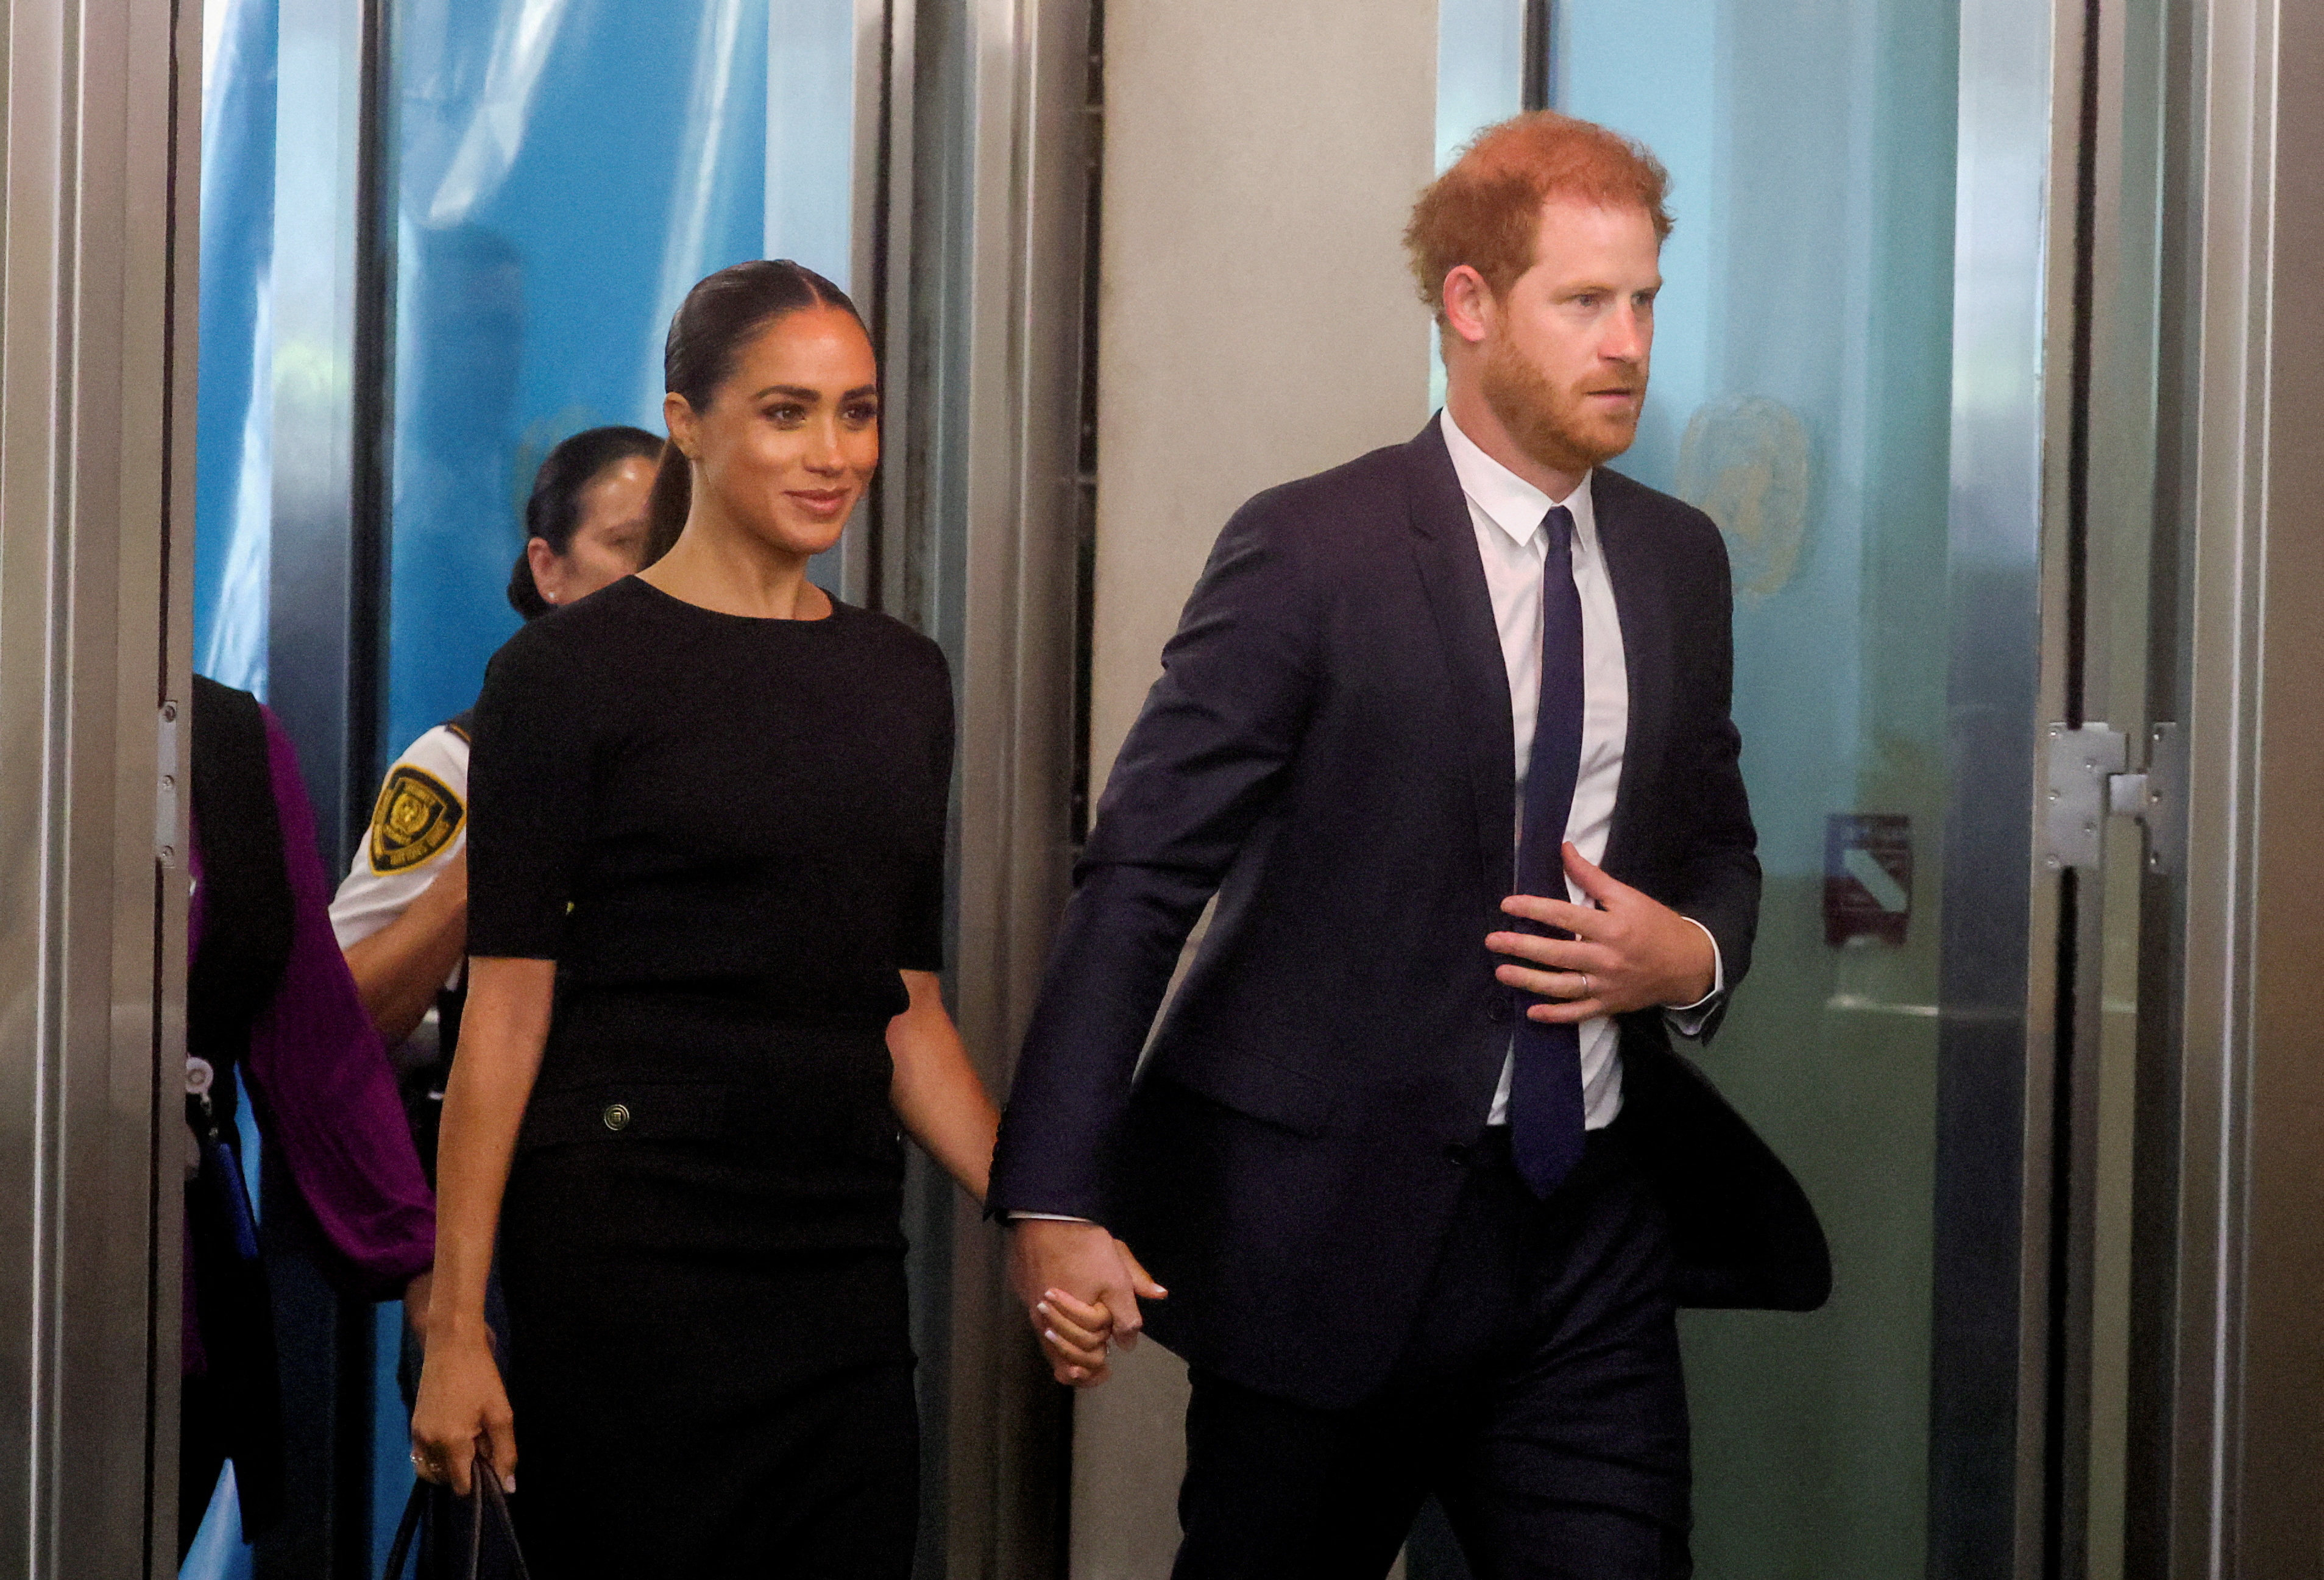 Competing claims surfaced over Prince Harry and his wife Meghan’s purported involvement in a “near catastrophic car chase” with paparazzi in New York. Photo: Reuters